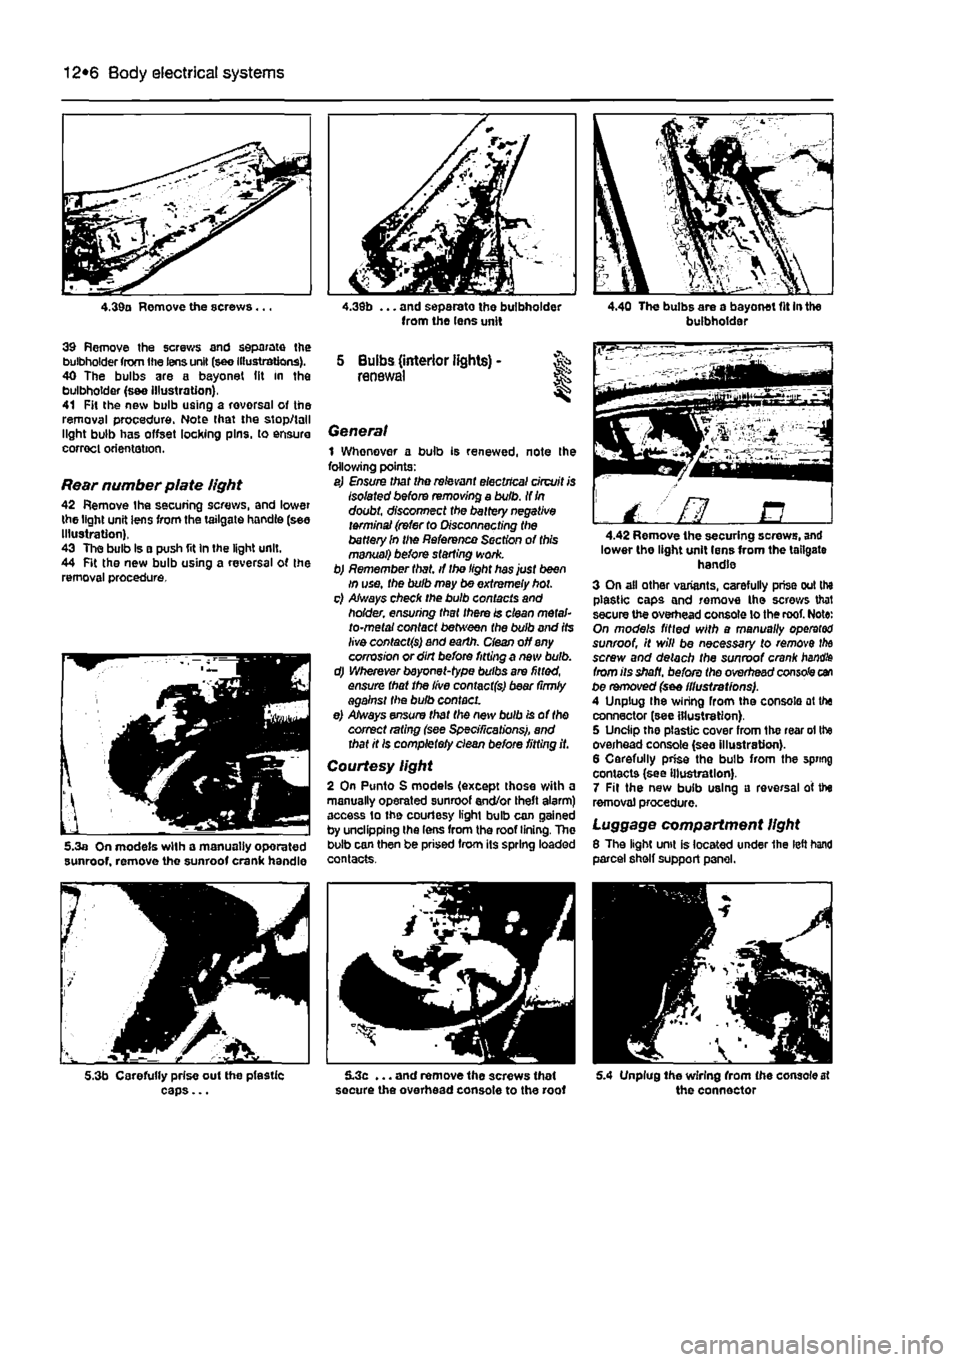 FIAT PUNTO 1996 176 / 1.G User Guide 
12*6 Body electrical systems 
4.39a Remove the screws... 
39 Remove the screws and separate the bulbholder from the lens unit (see Illustrations). 40 The bulbs are a bayonet (it in the bulbholder (s&